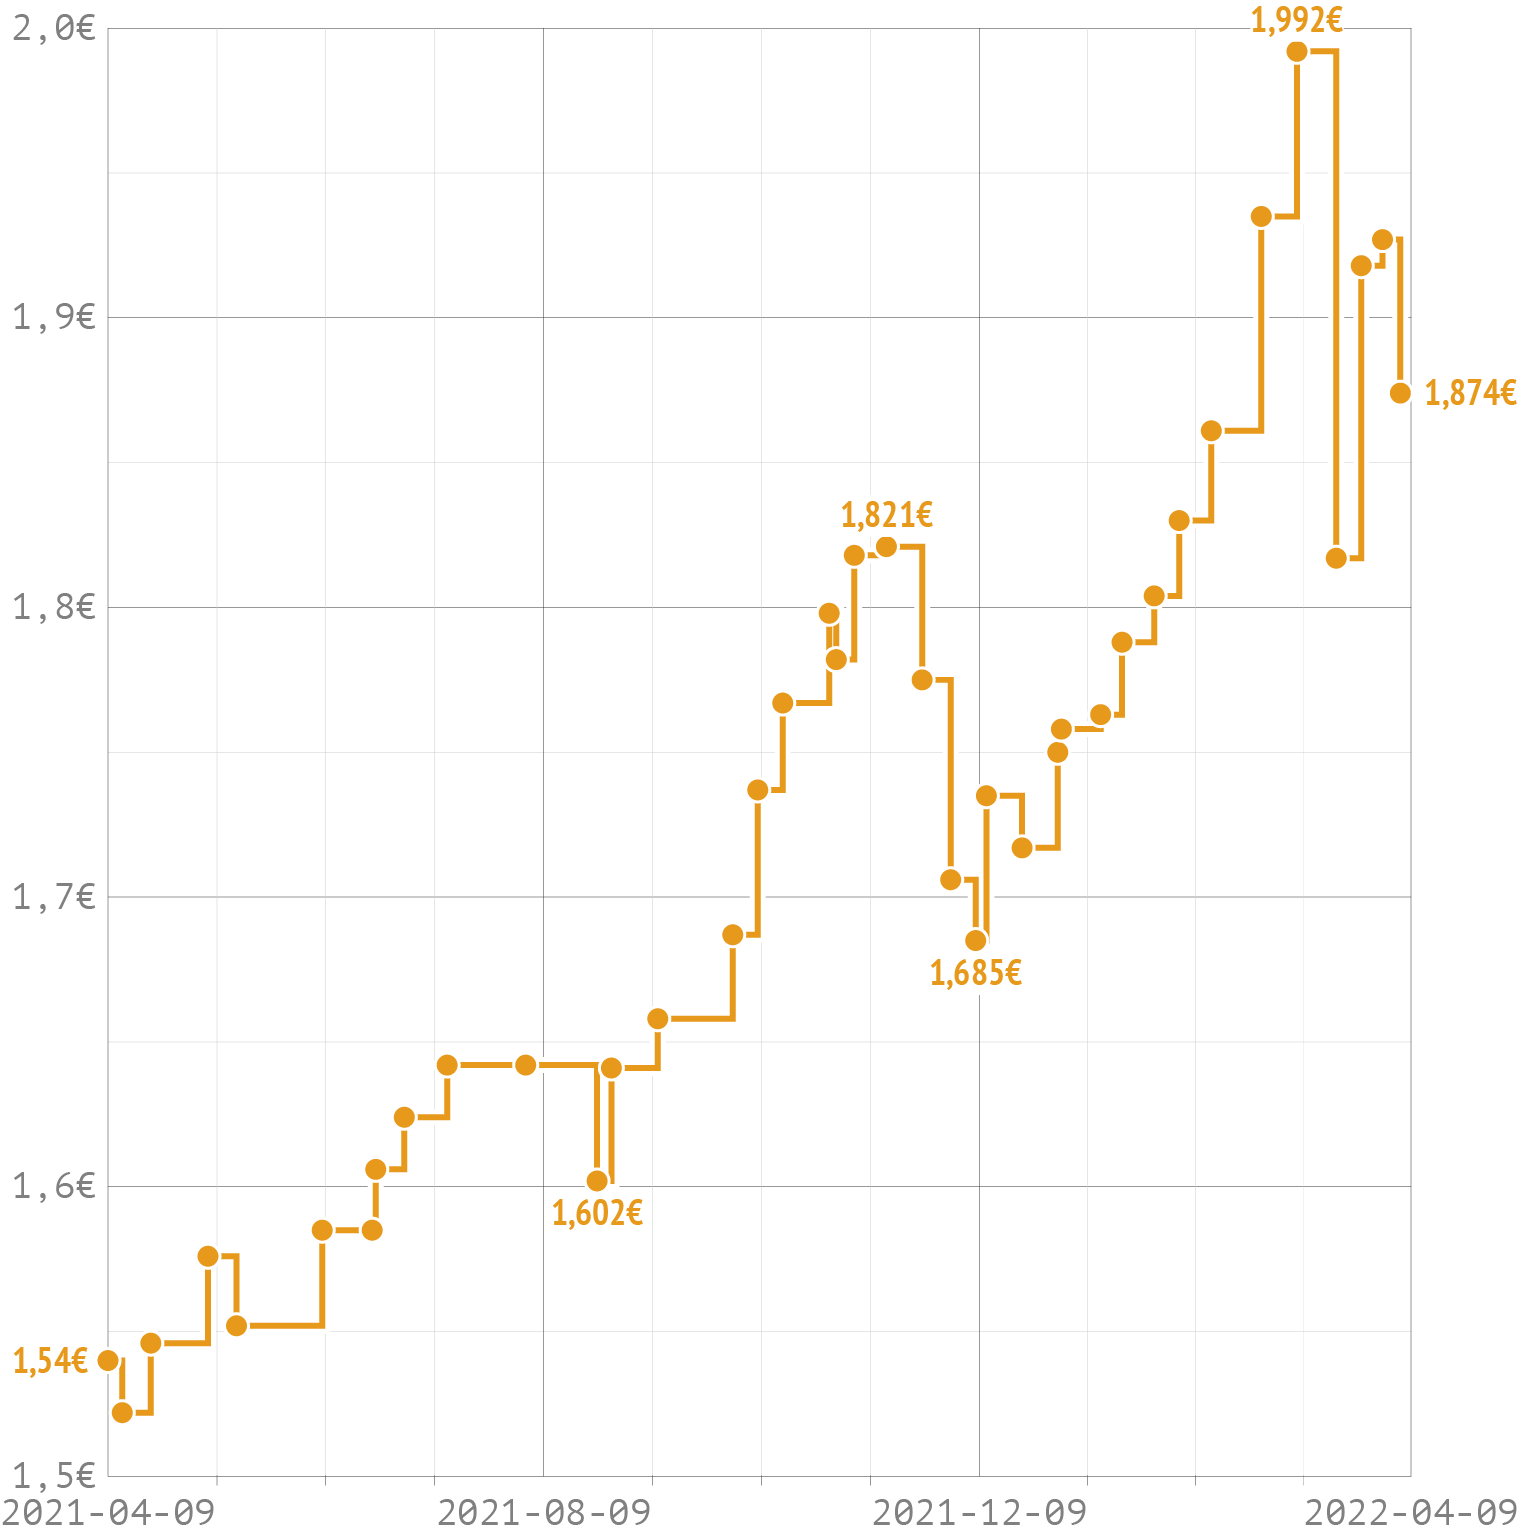 The same line chart as above, but with a stepped line interpolation